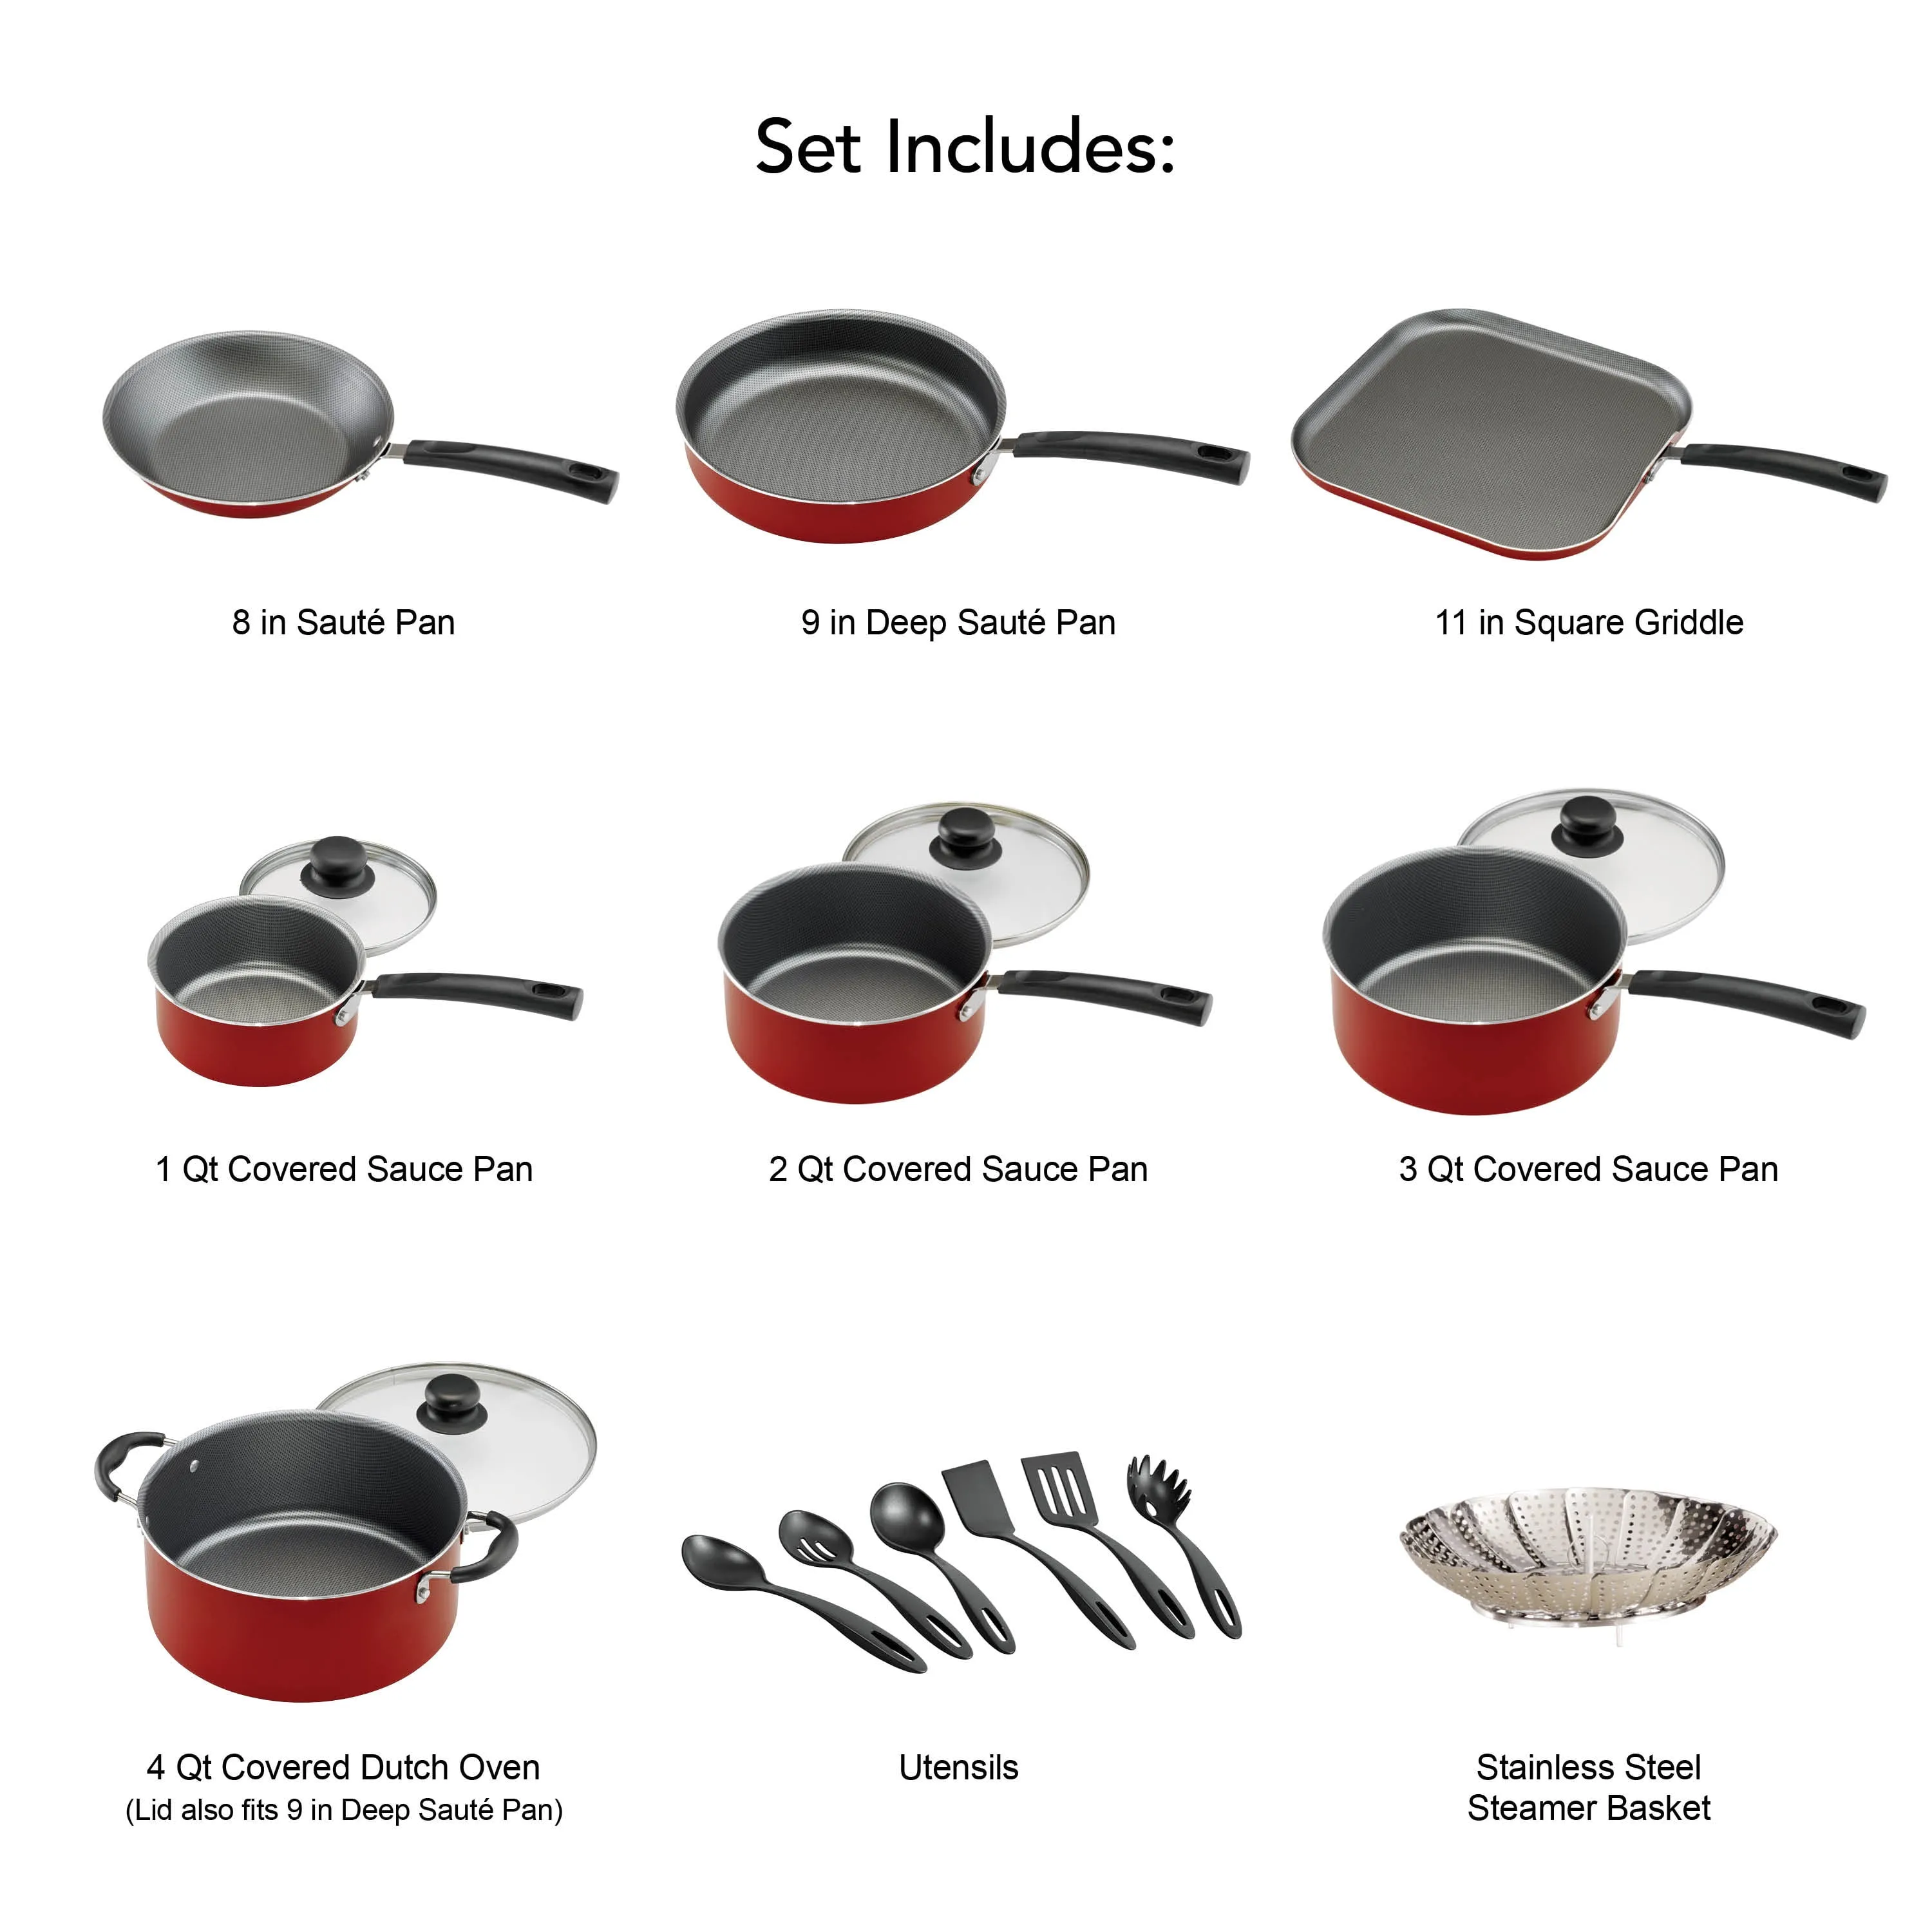 Goodful 12-Piece Classic Stainless Steel Cookware Set with Tri-Ply Base for  Even Heating, Durable, Impact Bonded Pots and Pans, Dishwasher Safe  Includes Non Stick Frying Pan, Chrome 